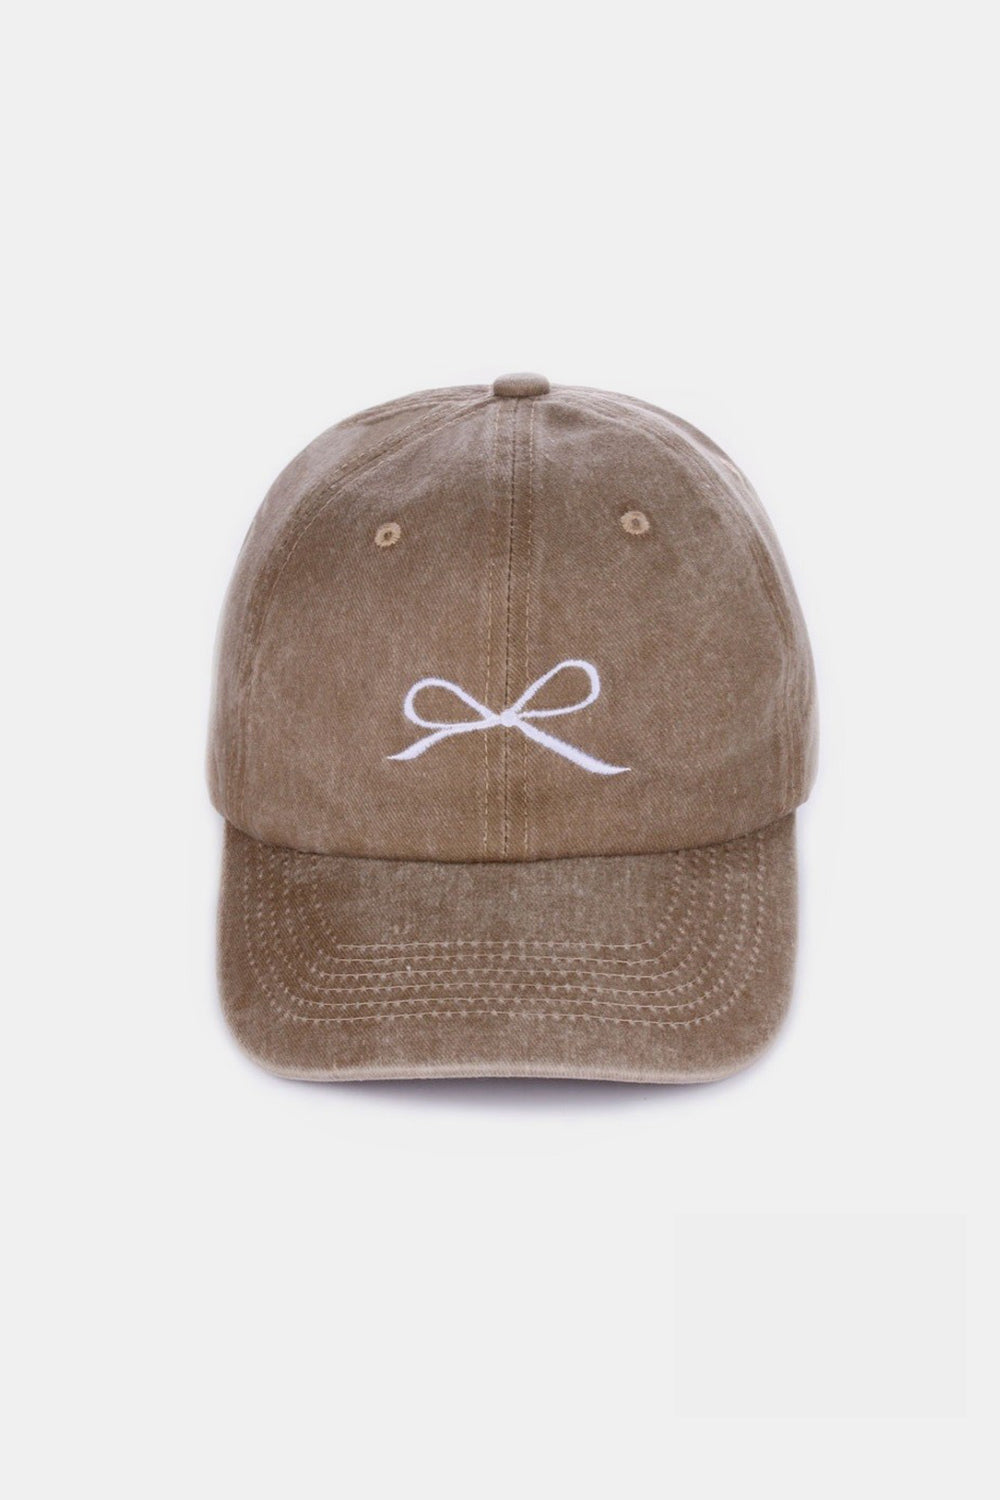 Dim Gray Zenana Bow Embroidered Washed Cotton Caps Sentient Beauty Fashions Apparel & Accessories